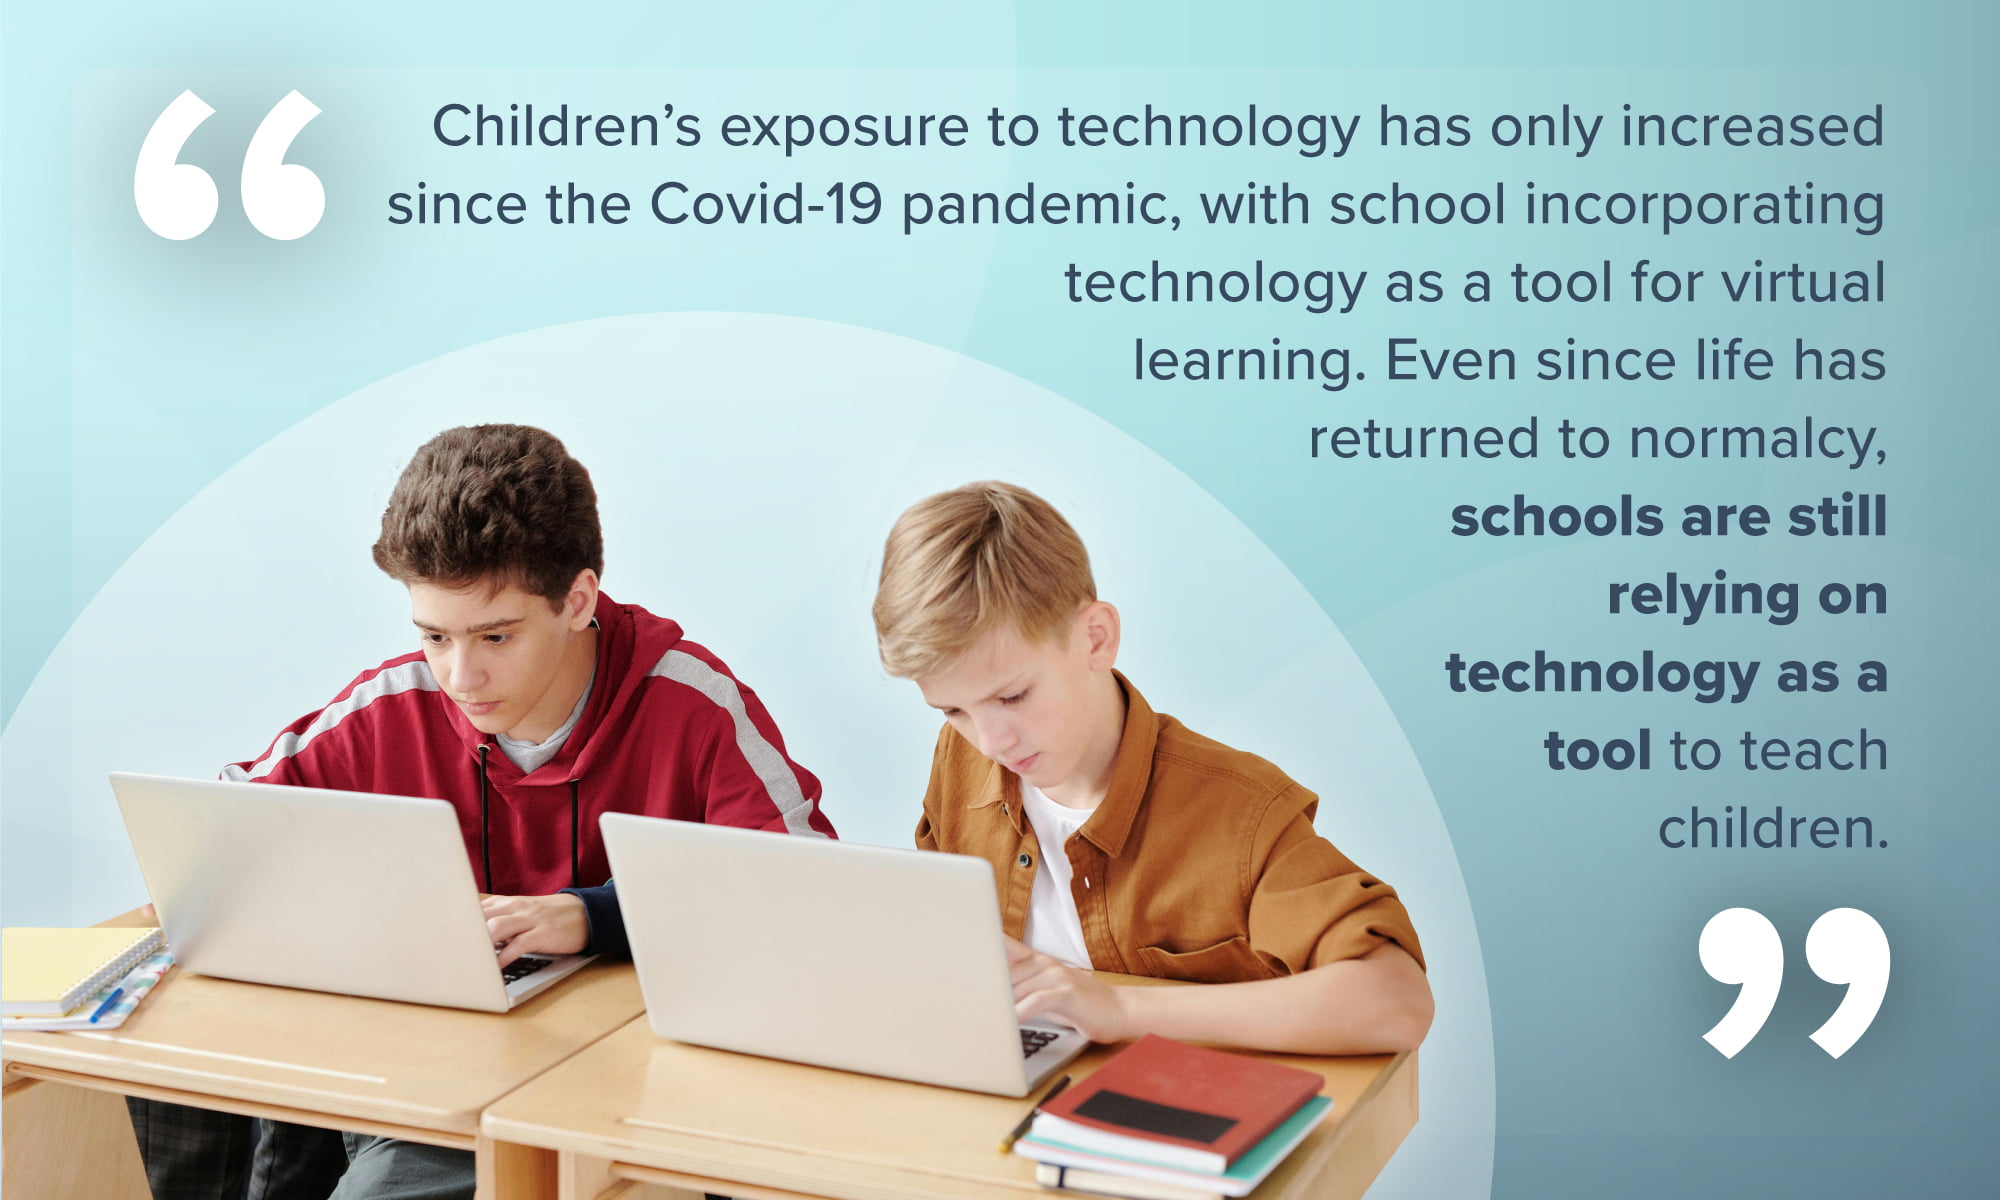 An image depicting two boys at a desk, their eyes fixed on laptops in front of them, accompanied by the quote: "Children's exposure to technology has only increased since the Covid-19 pandemic, with schools adopting digital platforms as a tool for virtual learning. Even as life has returned to normalcy, schools are still relying on technology to teach children."